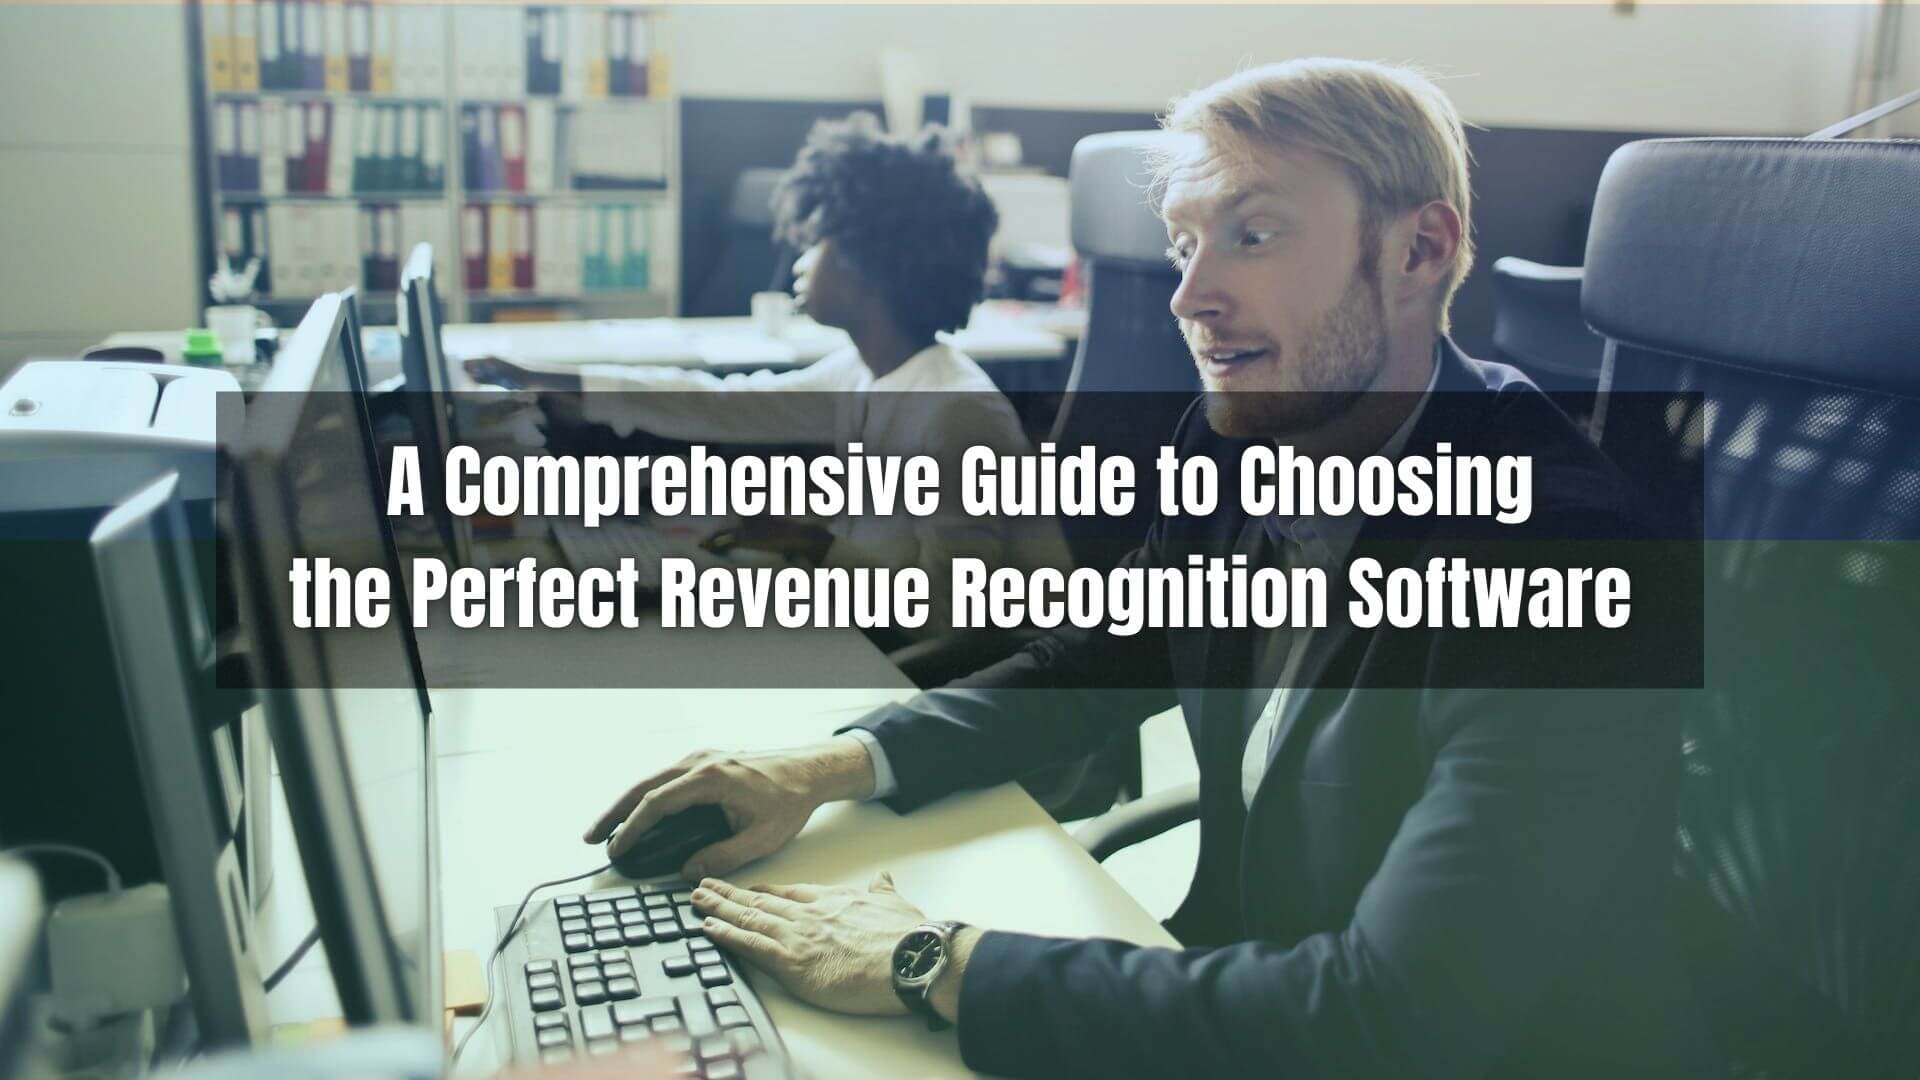 In the ever-evolving business landscape, choosing the right revenue recognition software is vital for modern businesses. Learn how!